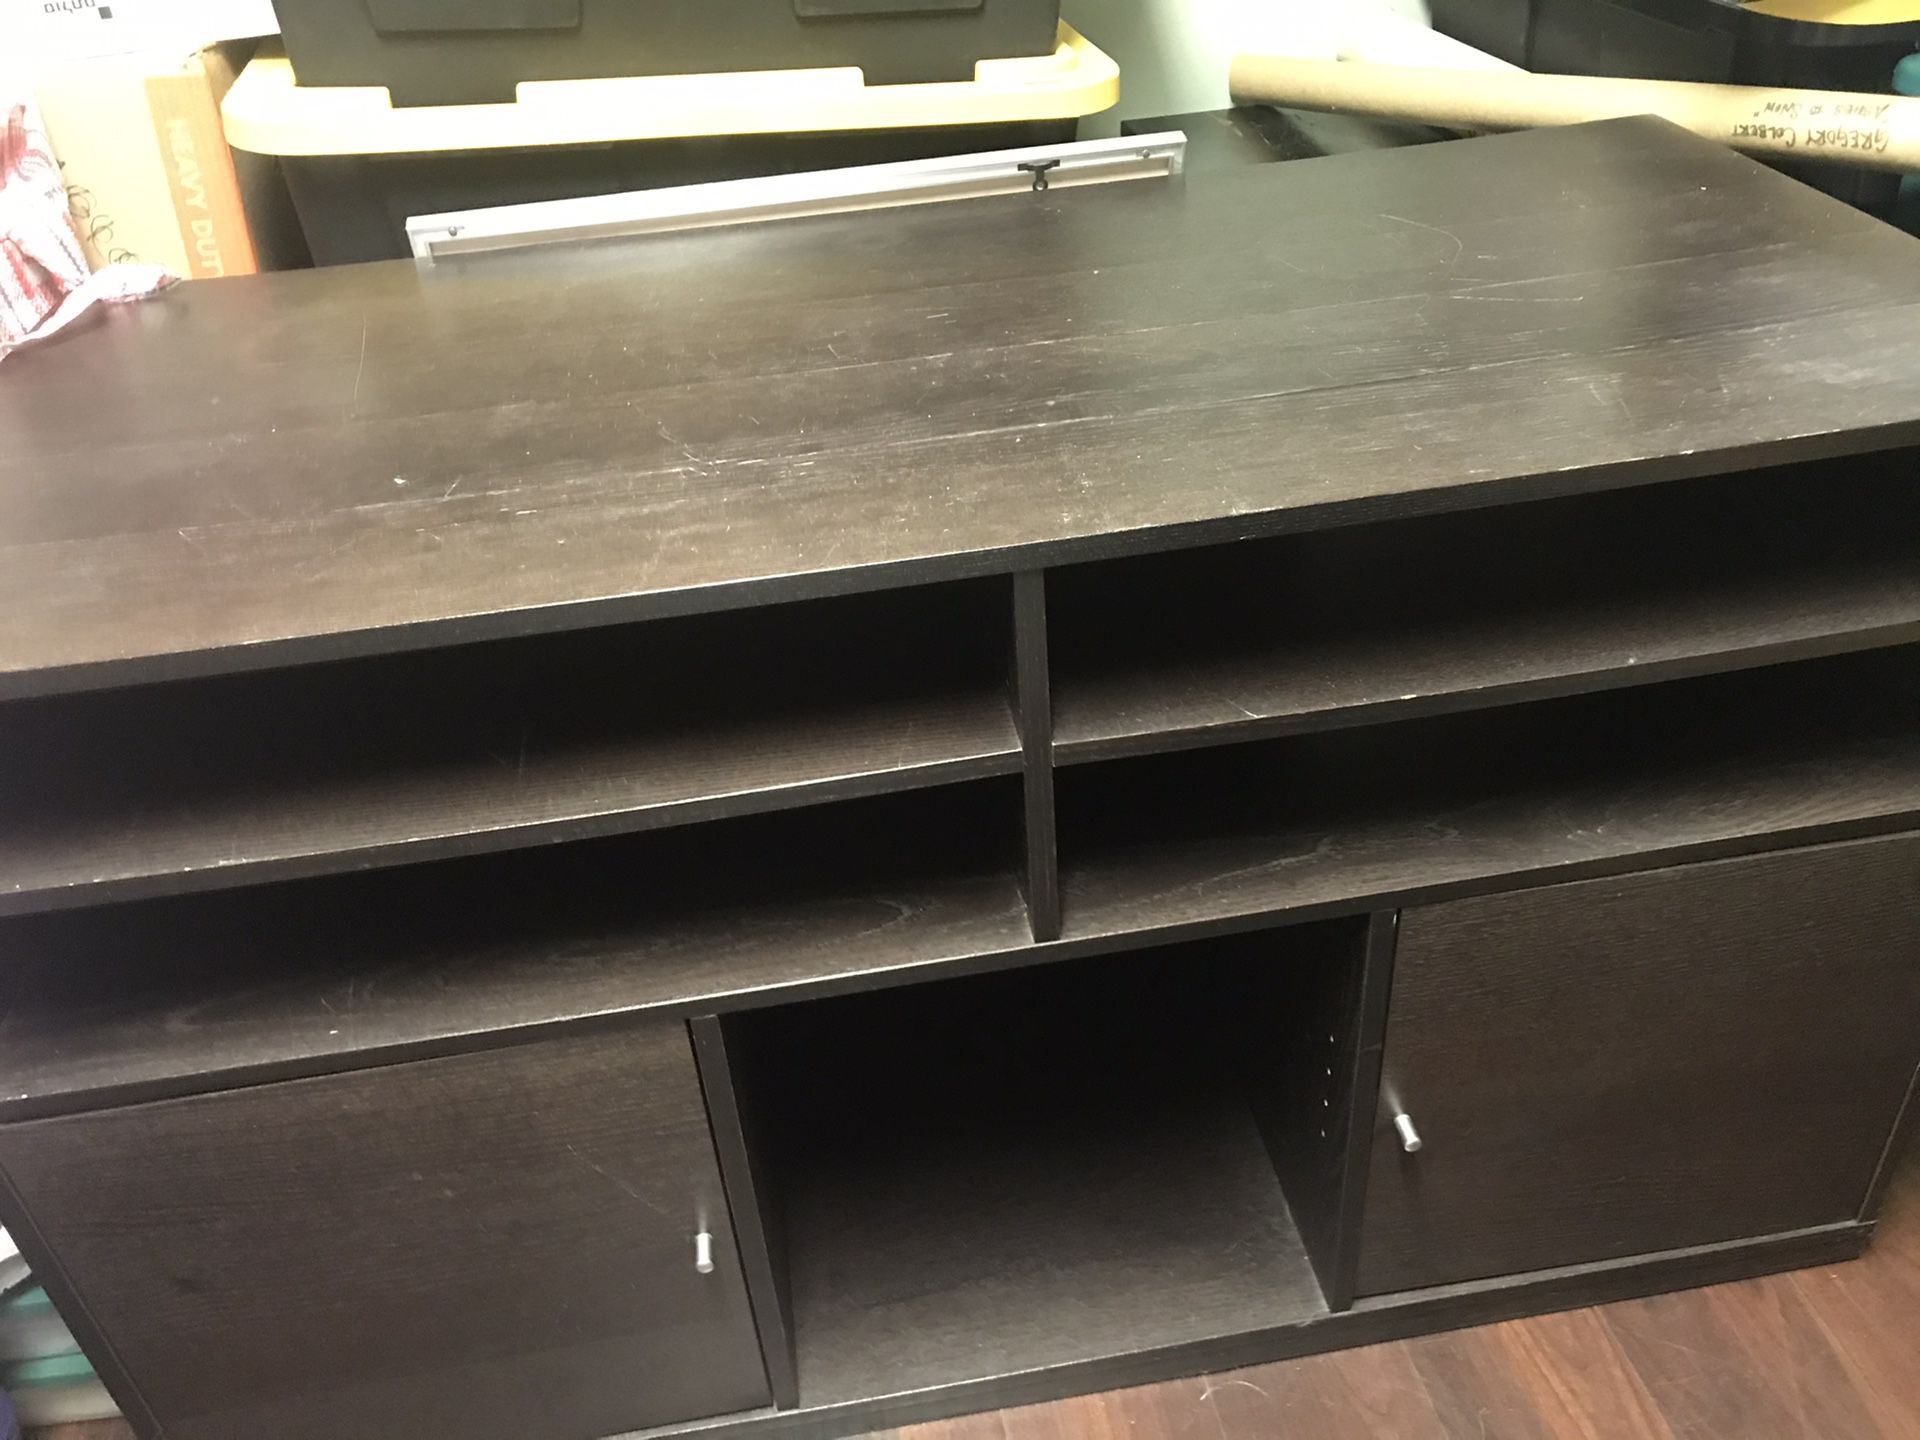 NAME YOUR PRICE - Black IKEA stand